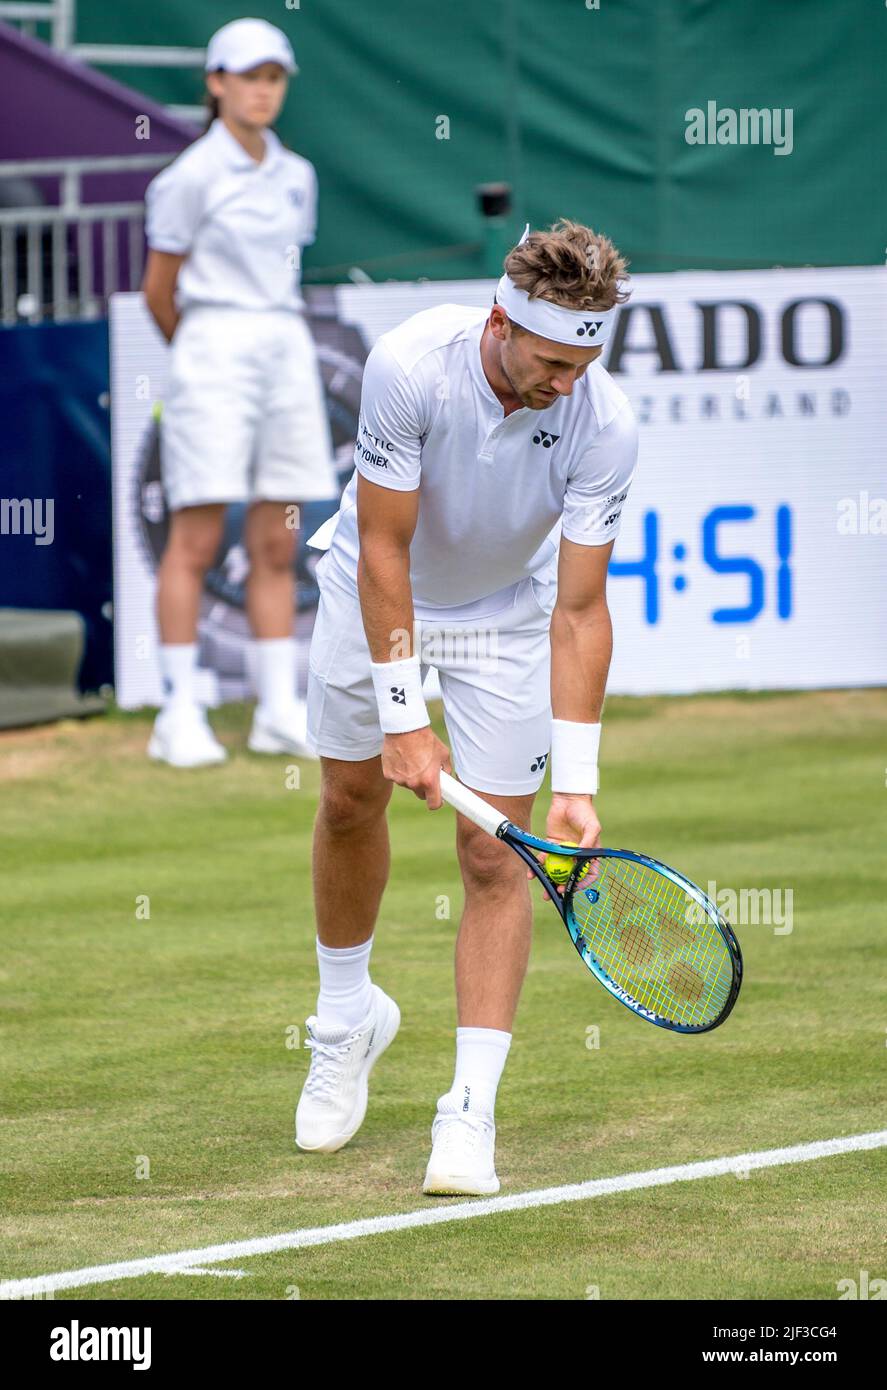 Casper Ruud gets ready to serve during the Giorgio Armani Tennis Classic at the Hurlingham Club, London, UK on 25 June 2022